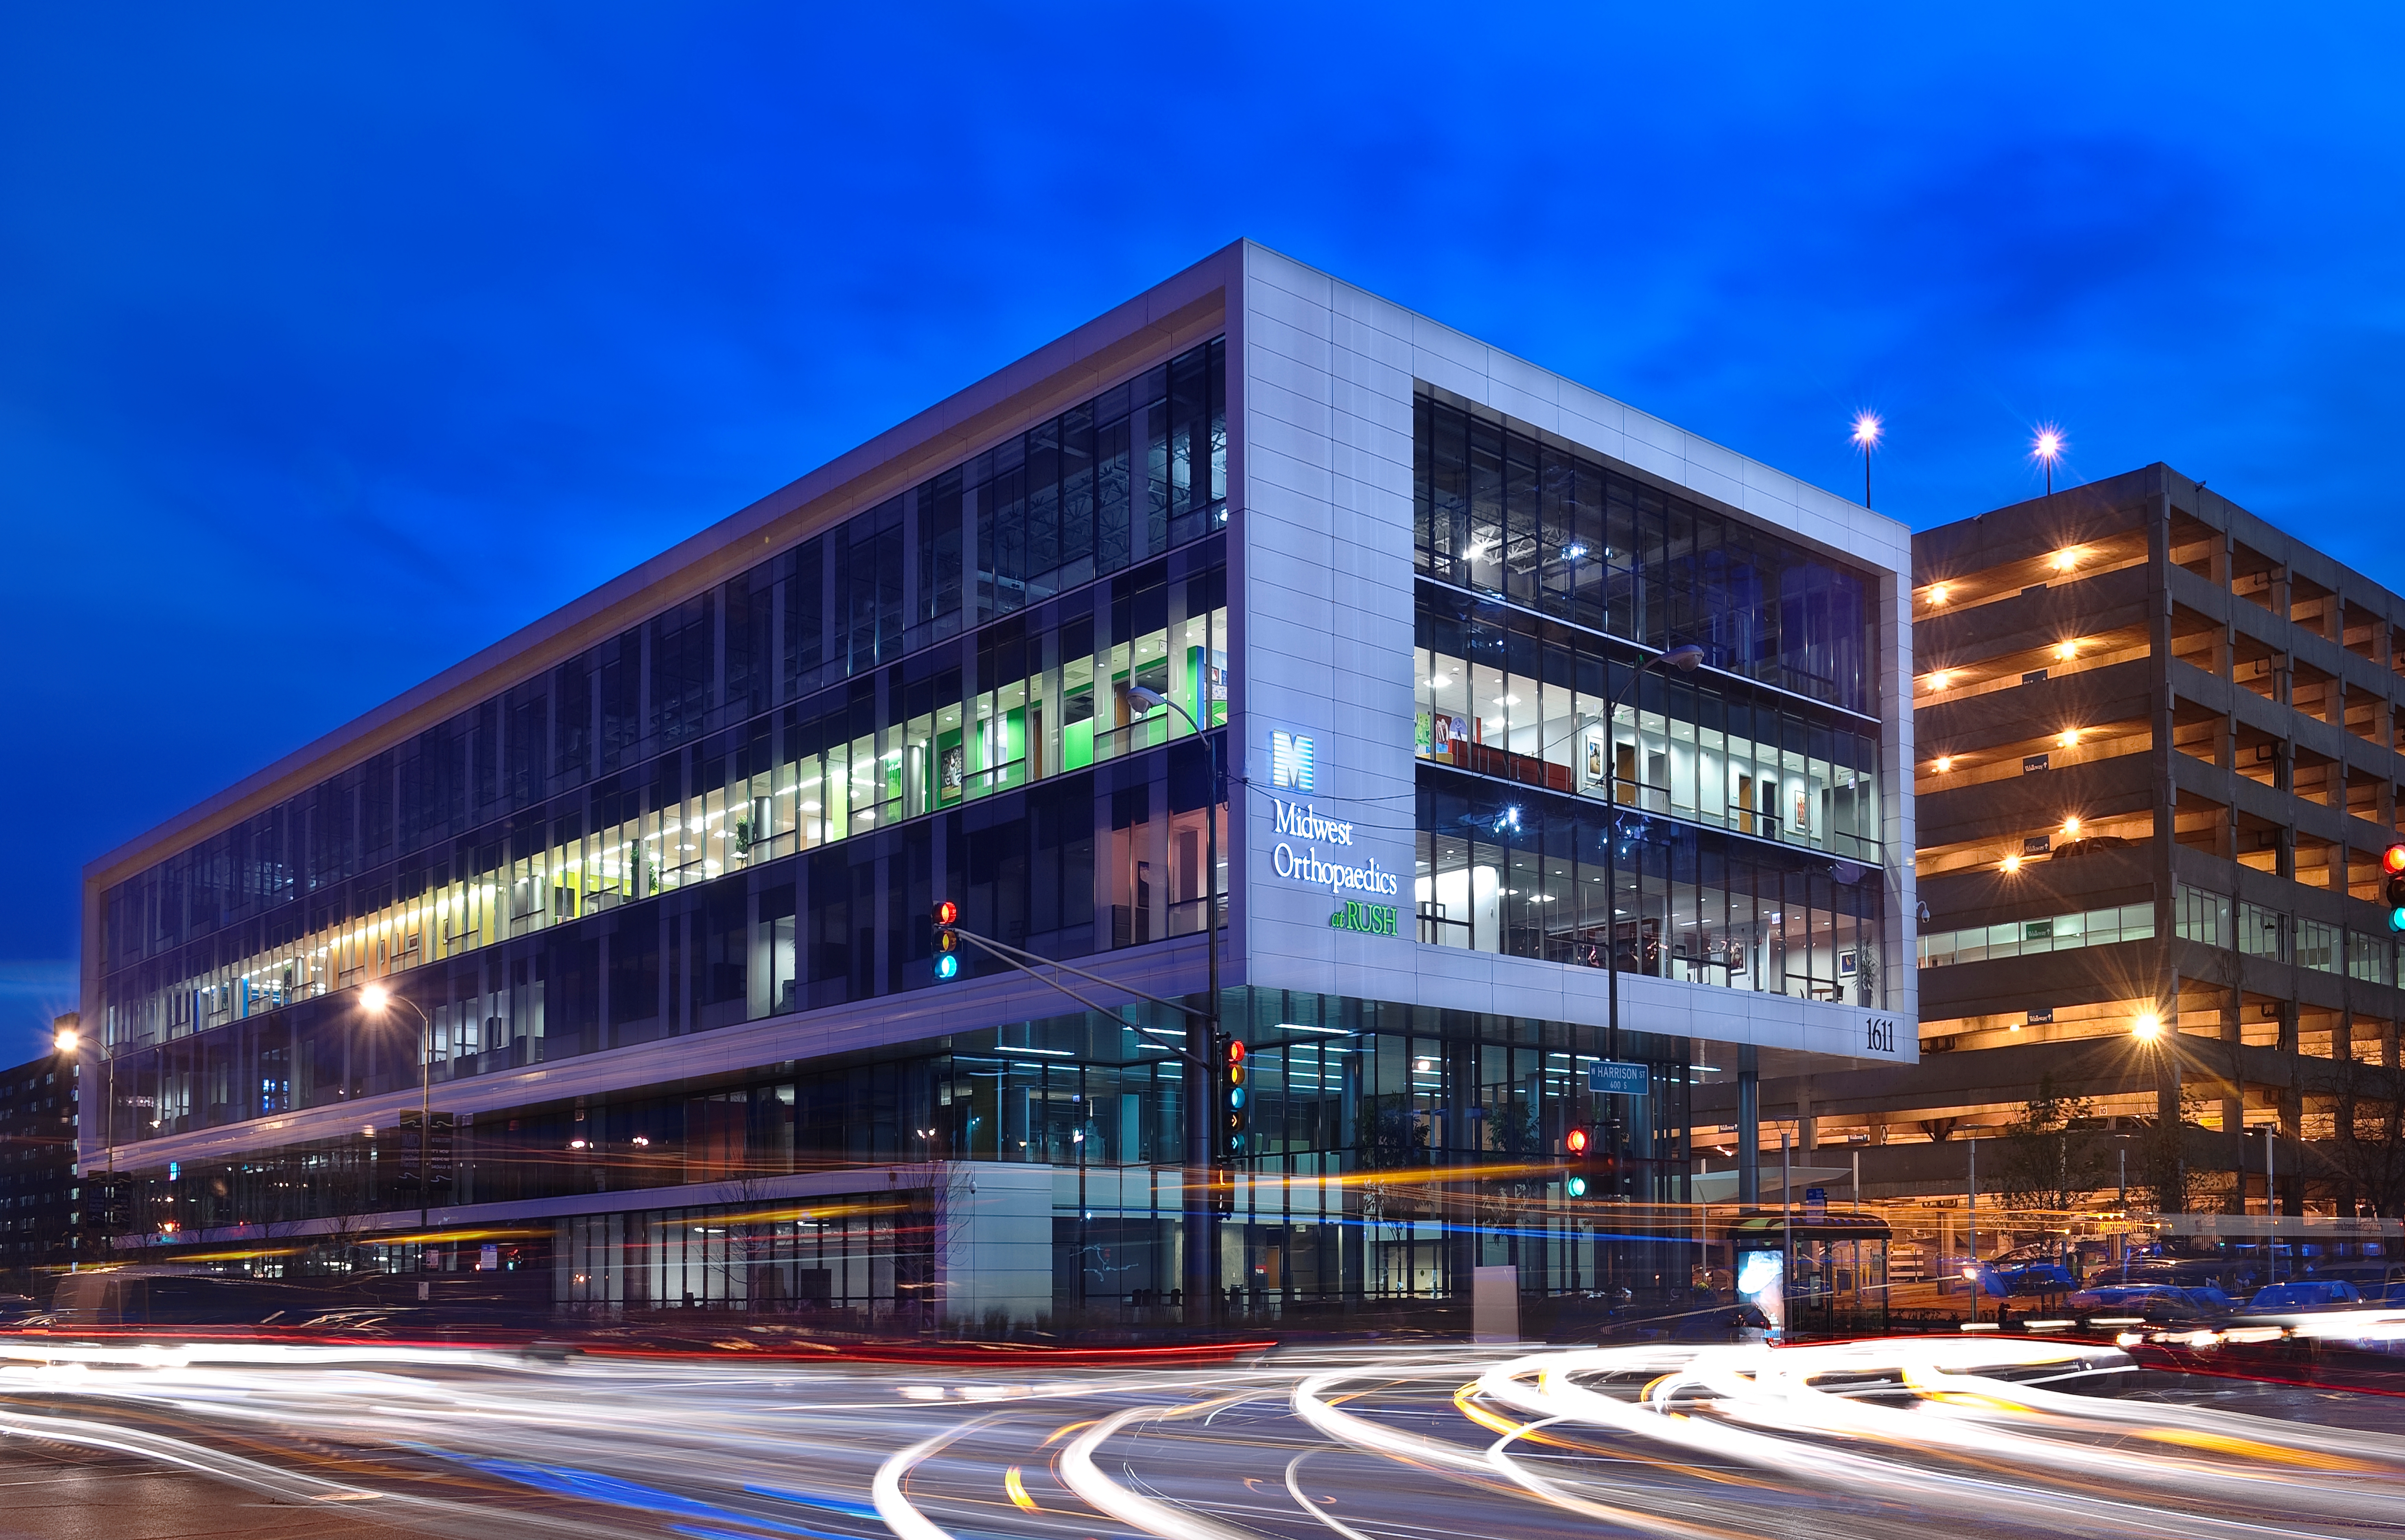 Chicago-based Harrison Street Real Estate Capital recently acquired about half of the square footage of the 220,000 square foot orthopedic ambulatory care building on the campus of Rush University Medical Center in Chicago. (Photo courtesy of CBRE Group Inc.)